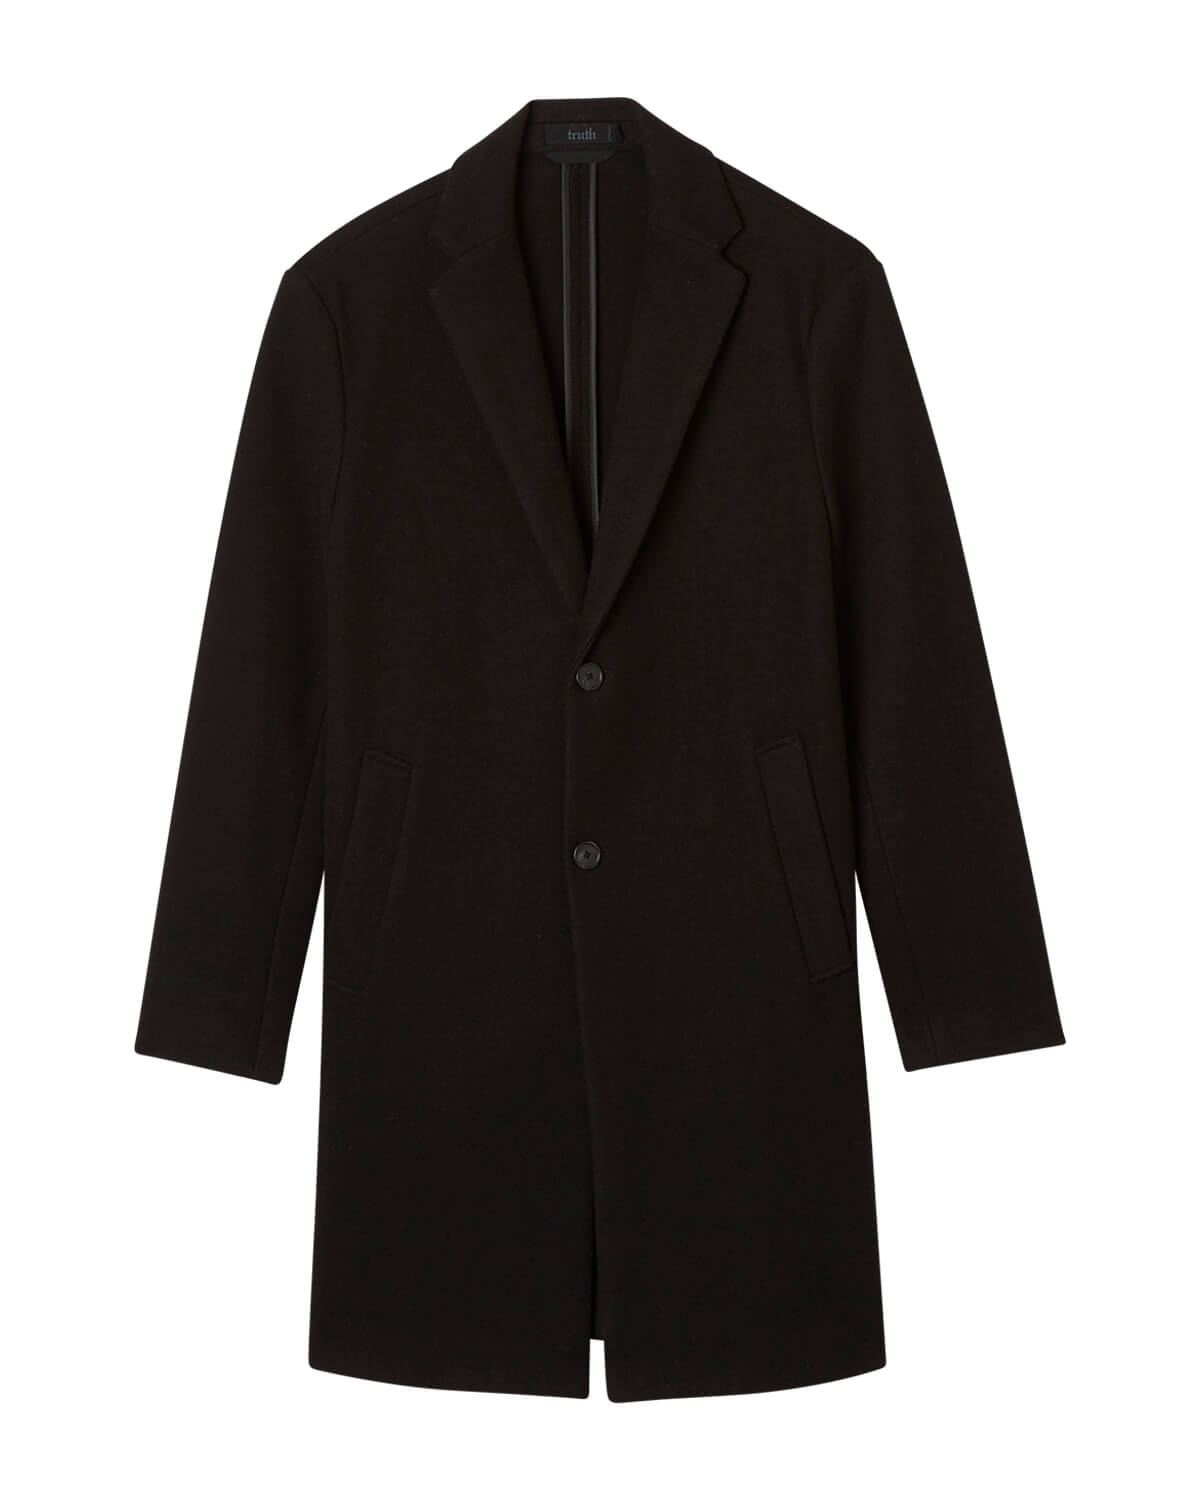 Shop Stretch Fabric Tailored Two-Button Coat | Truth Men | JANE + MERCER